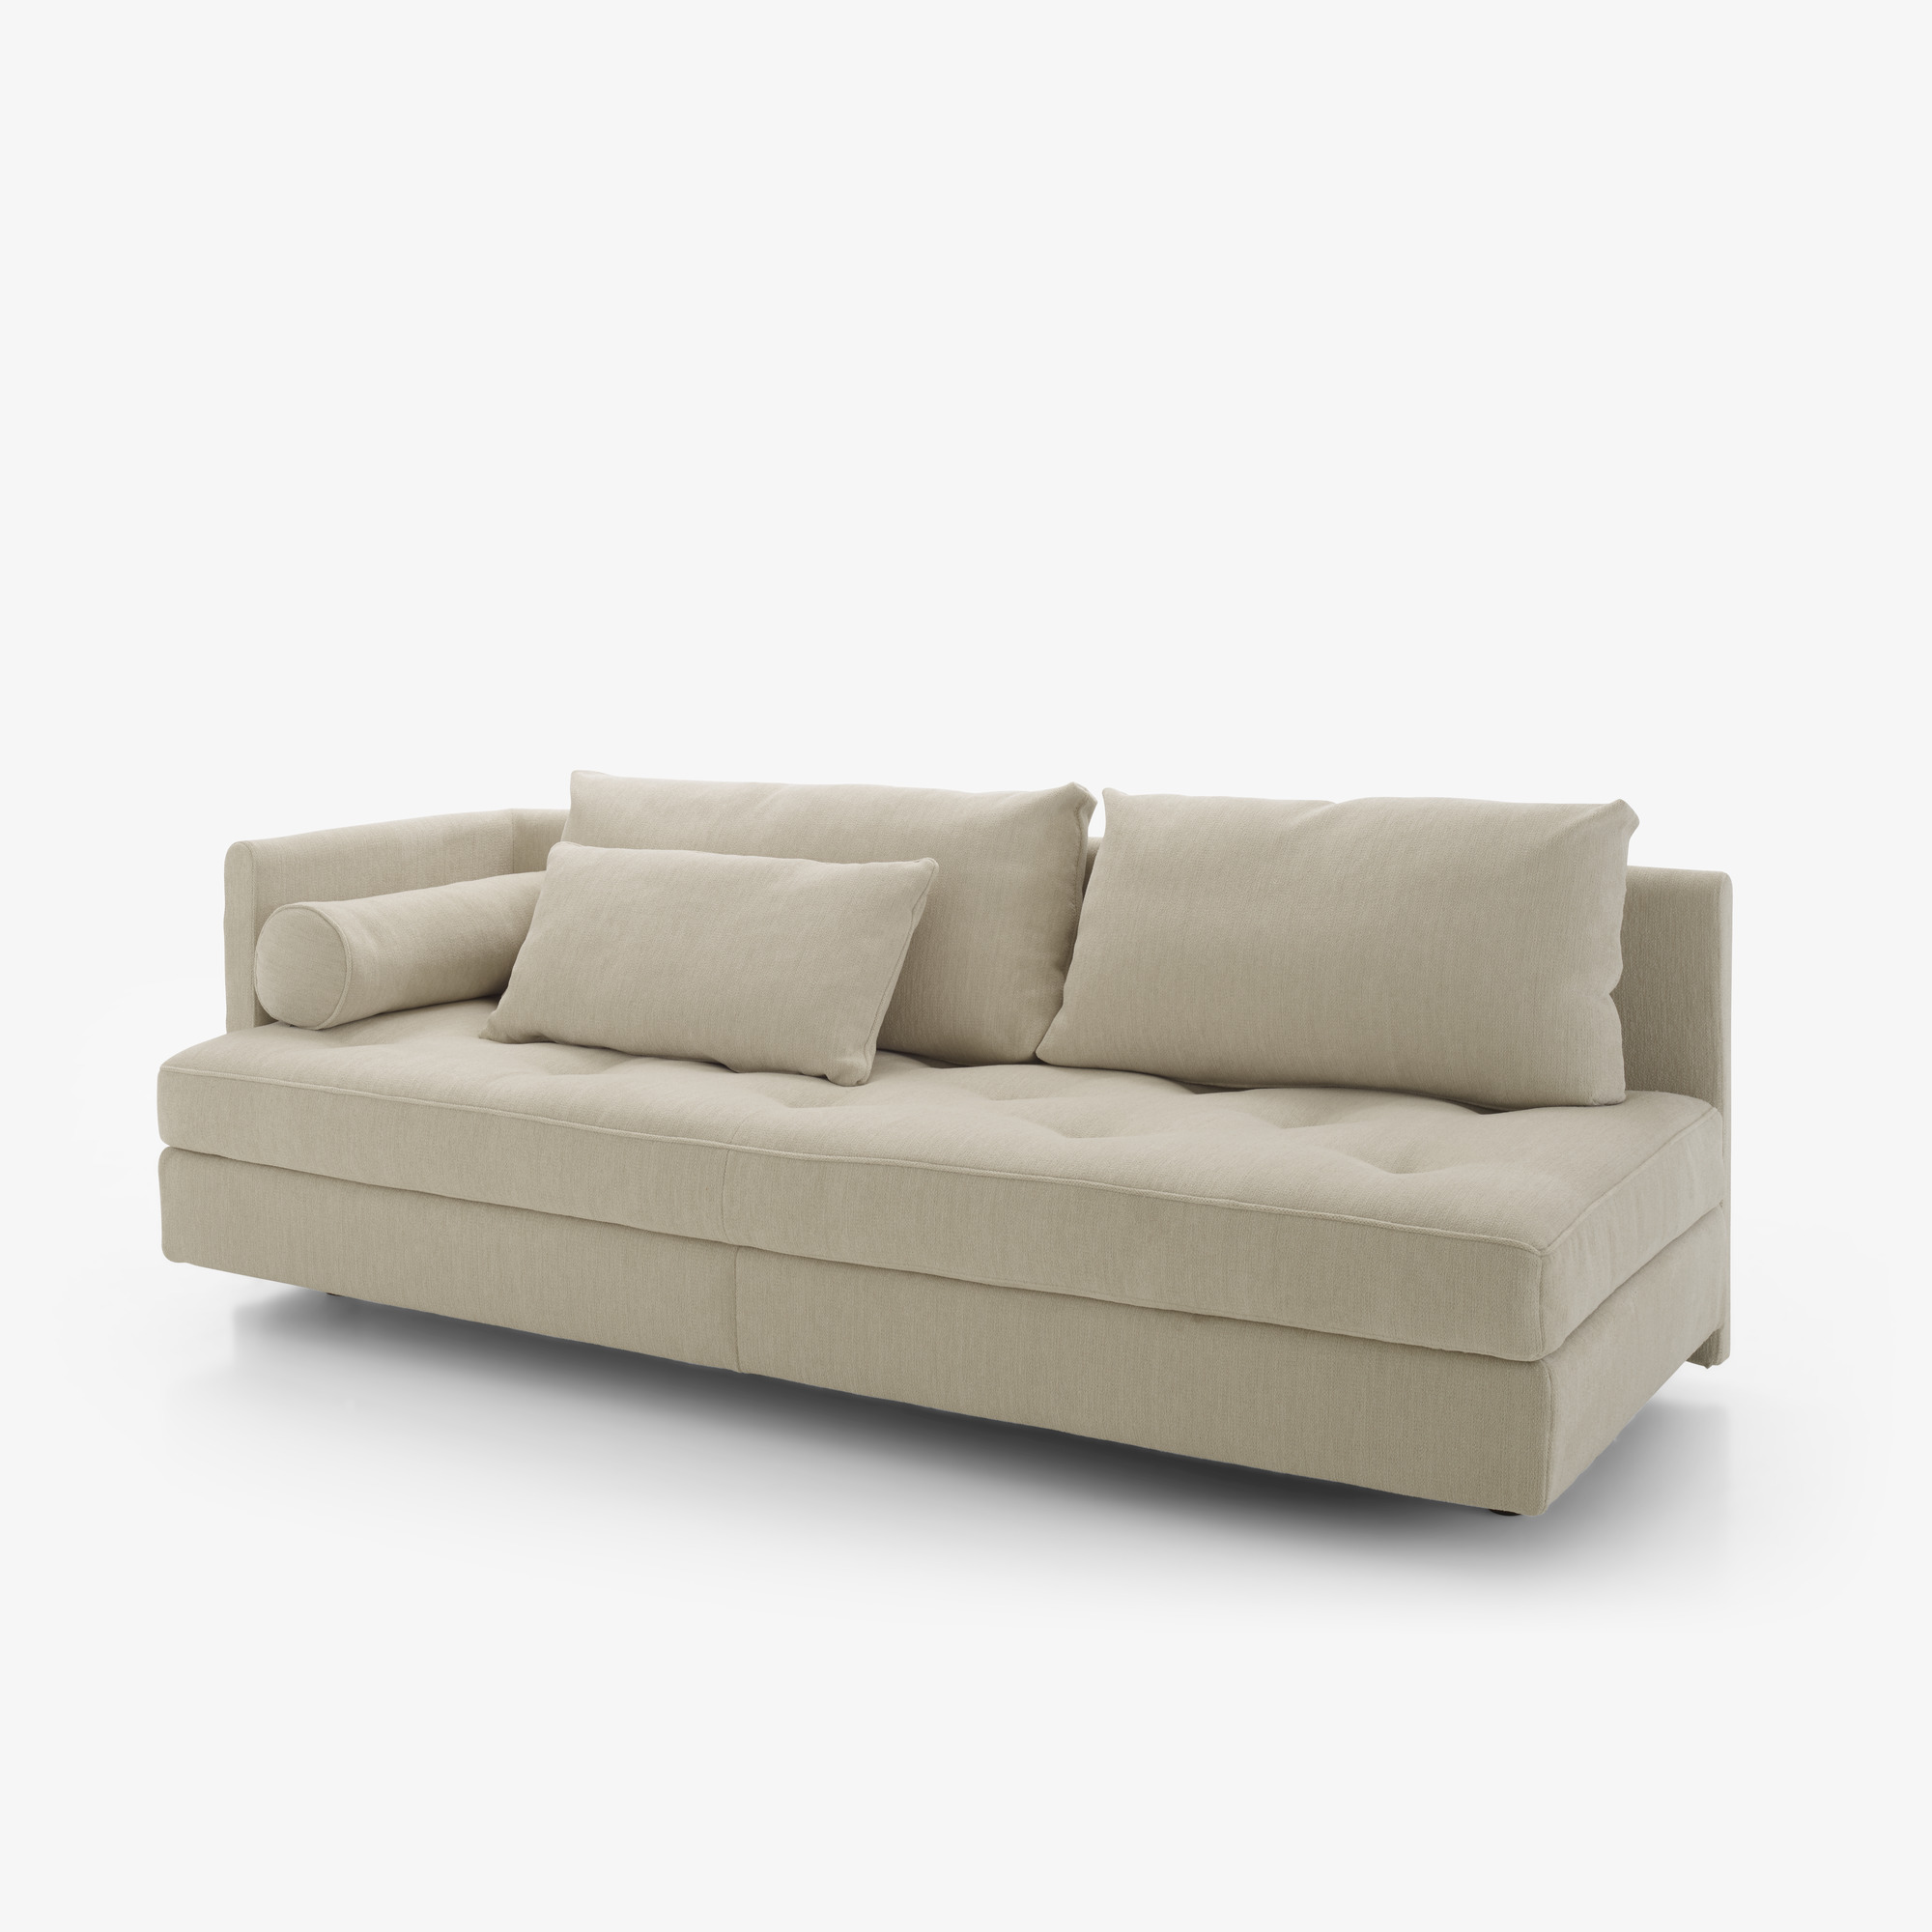 Image Large 1-armed settee 3